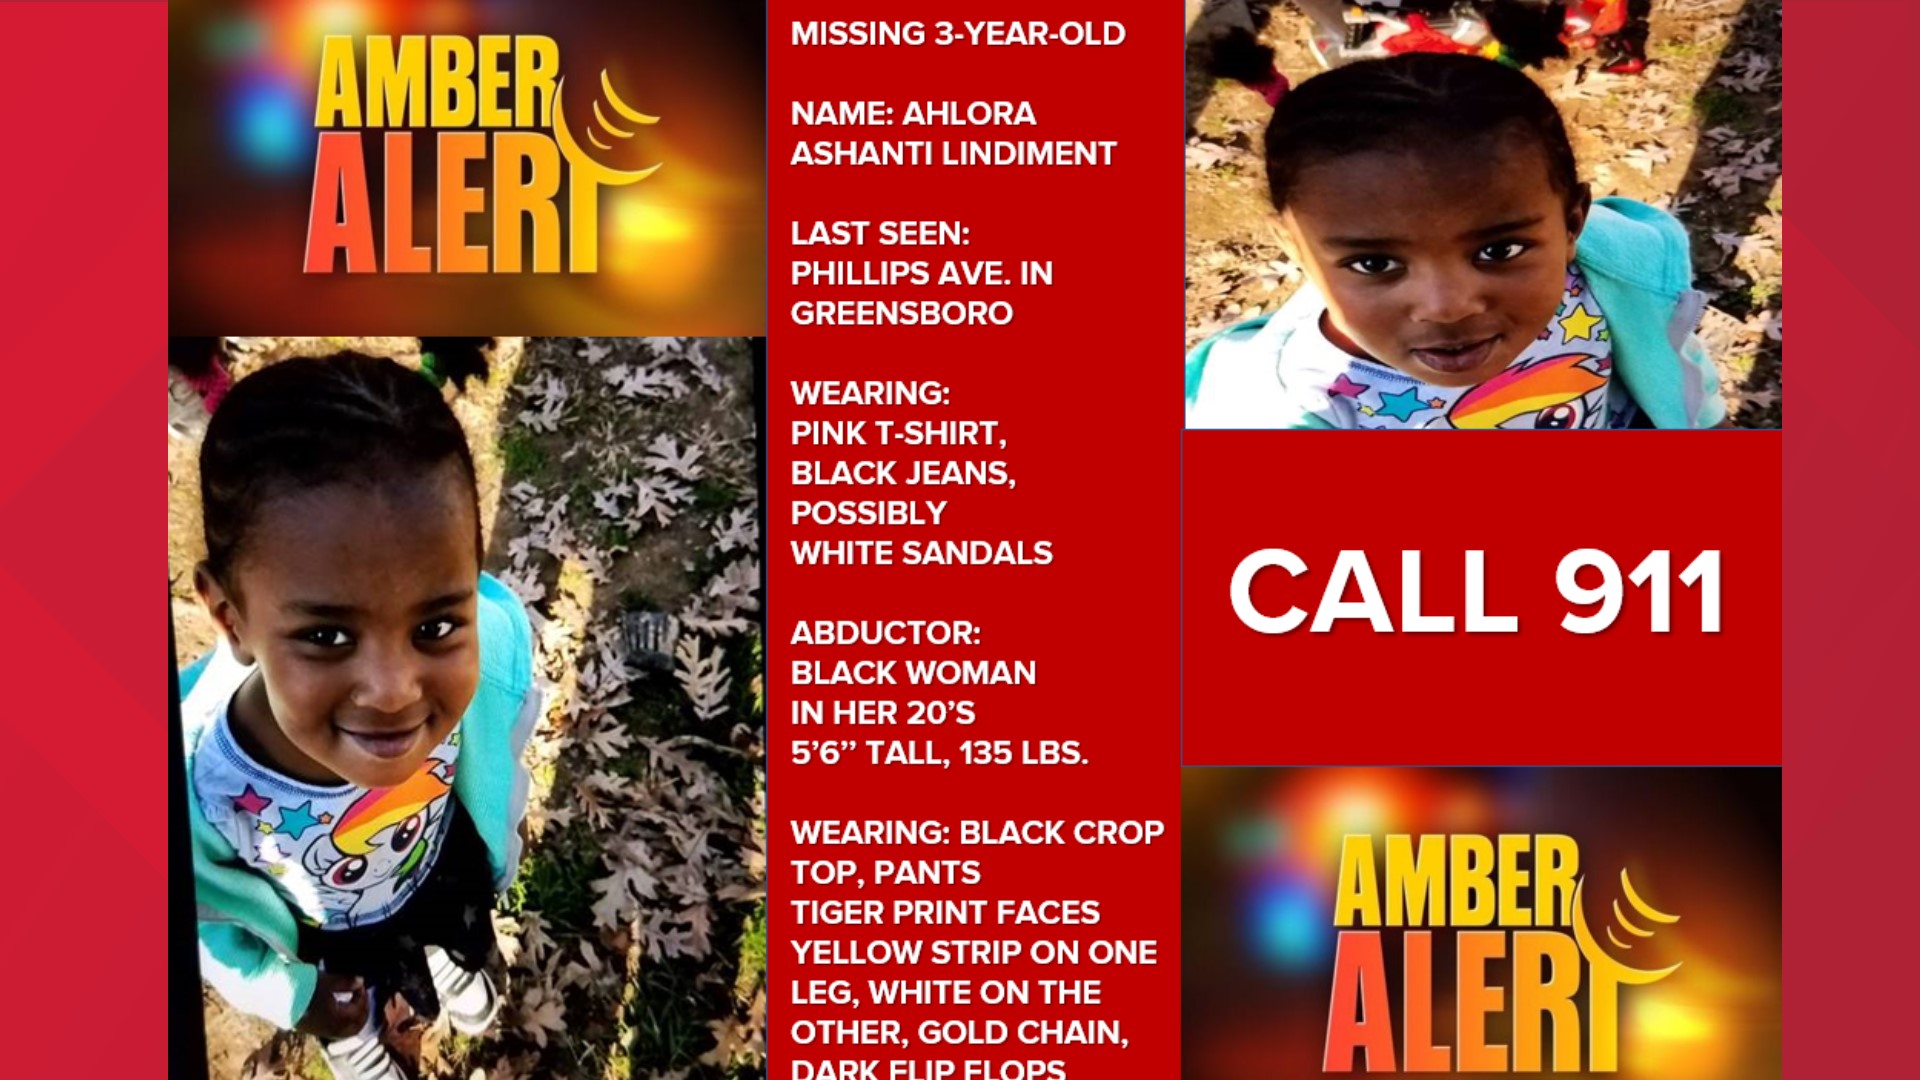 Amber Alert issued after 3-year-old Ahlora Lindiment reportedly abducted from Greensboro in the Philips Avenue area Wednesday night.